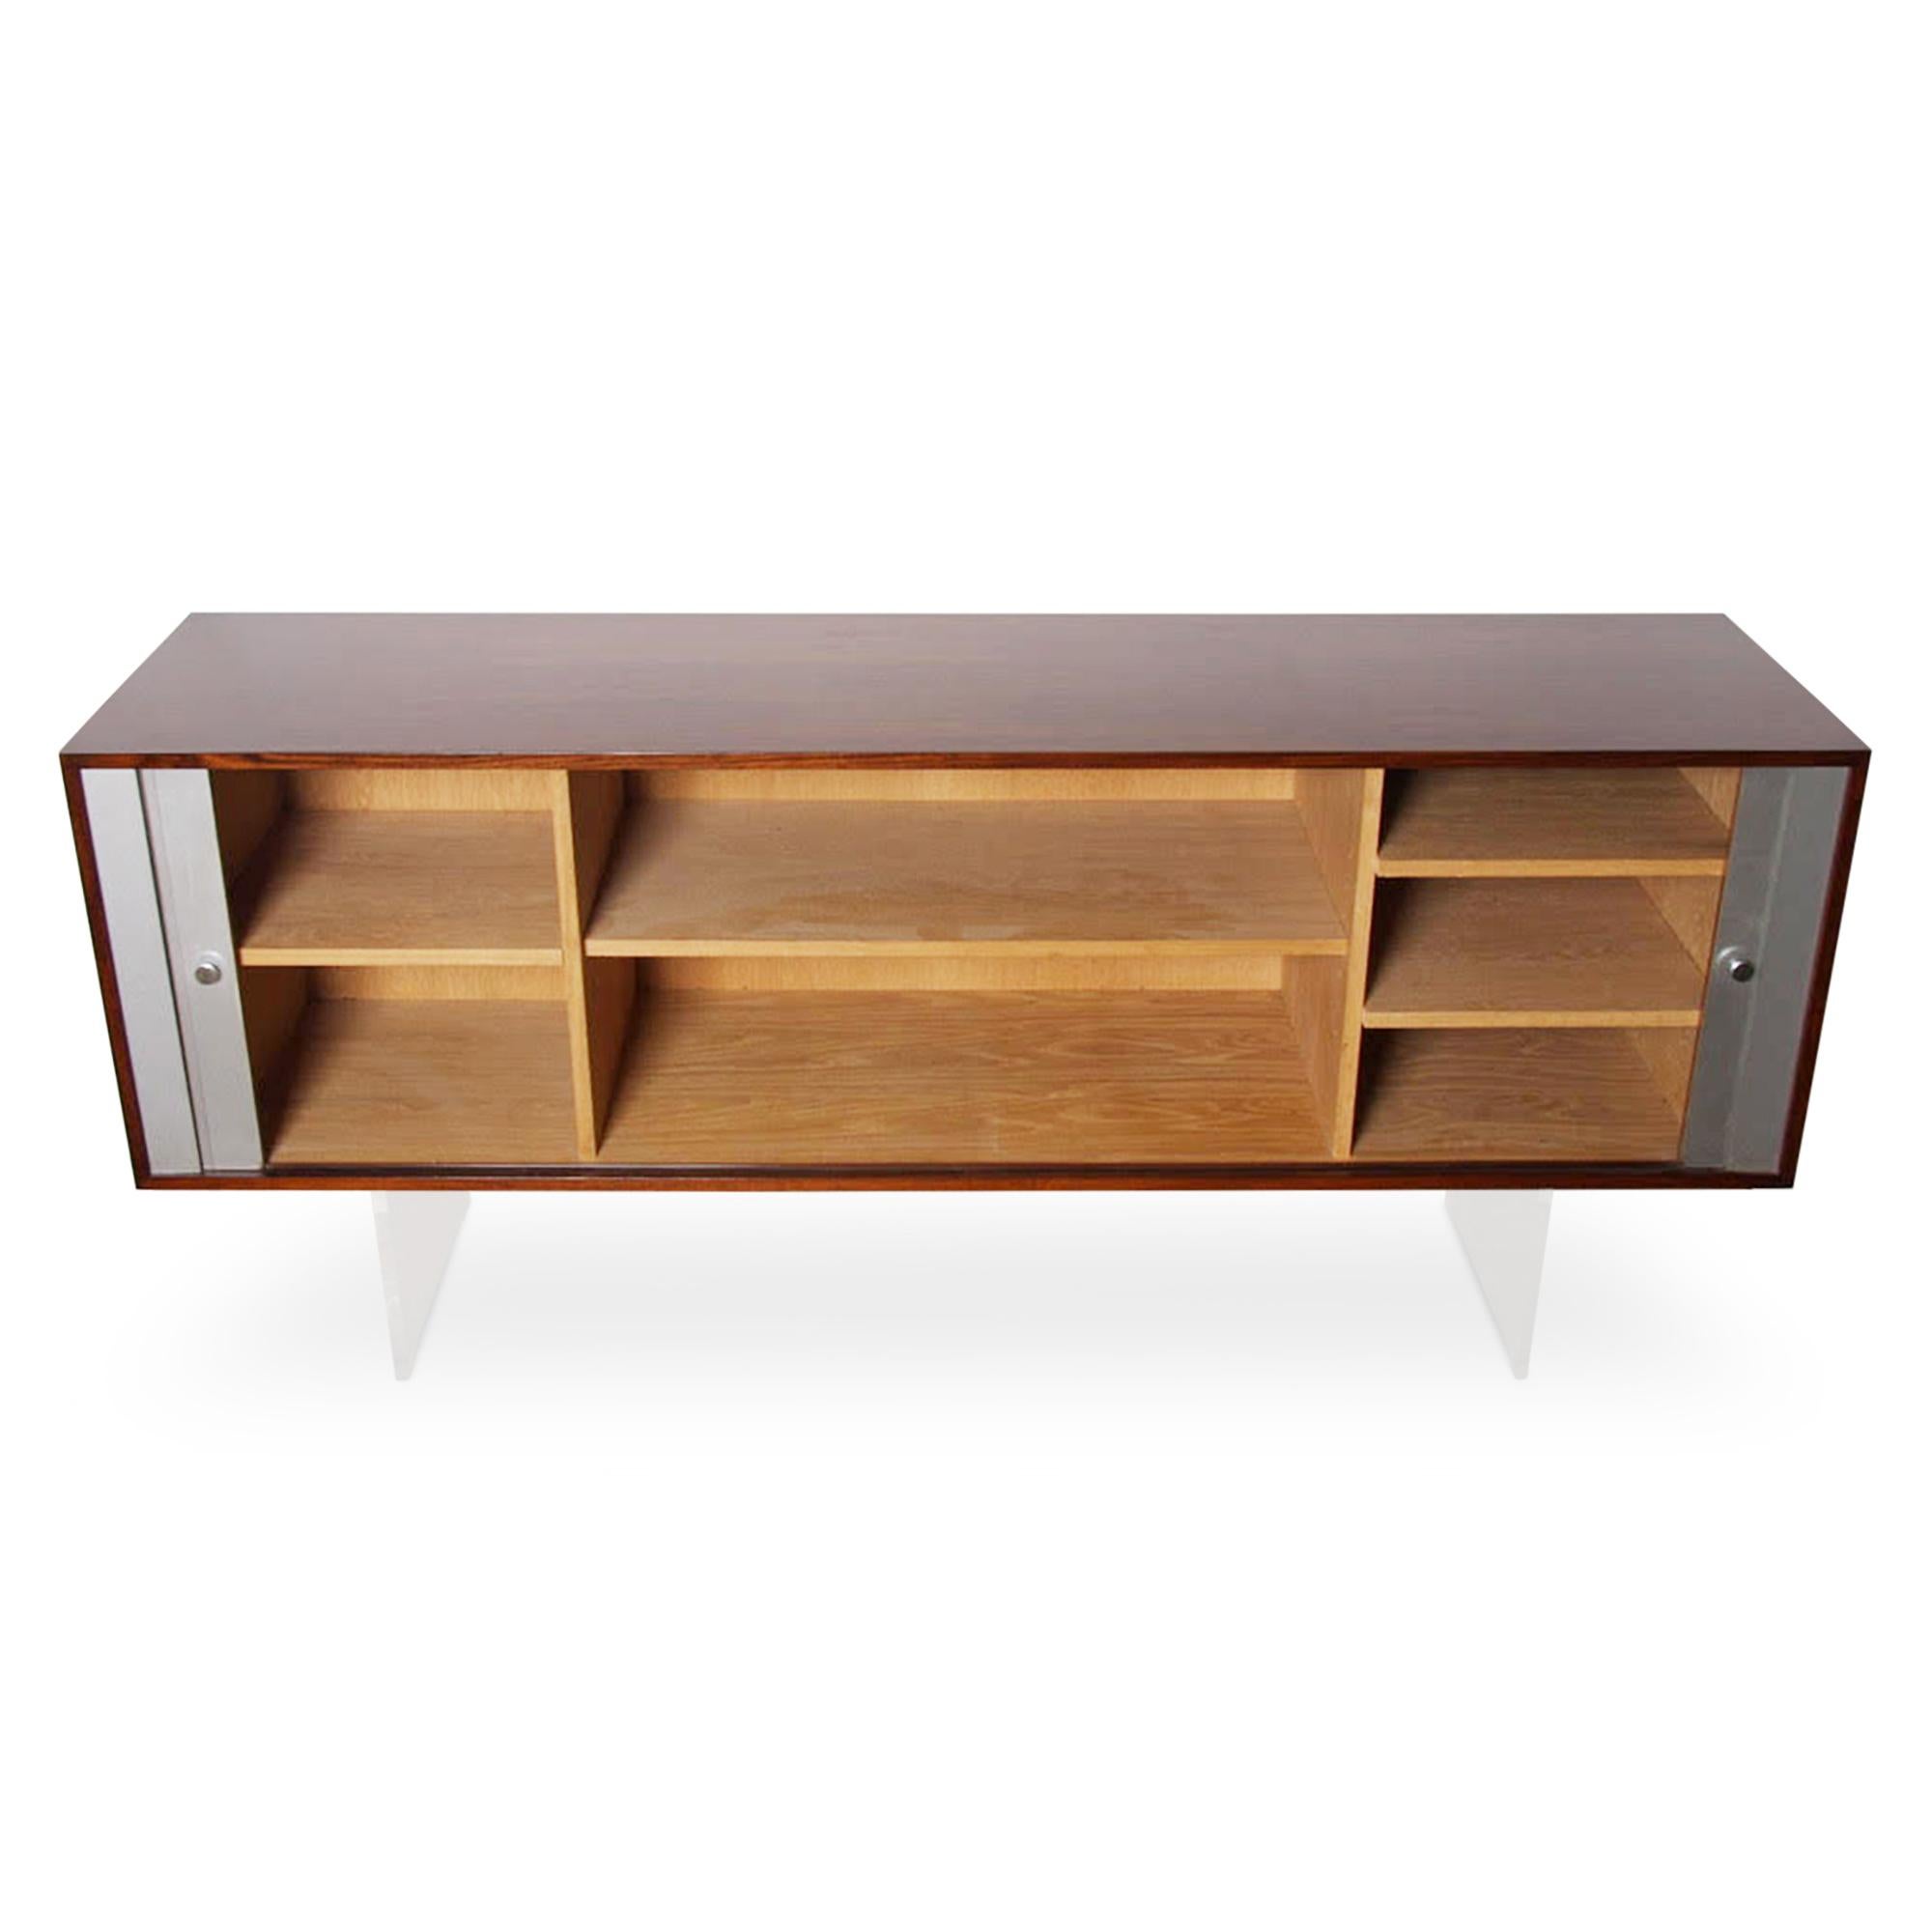 Danish Midcentury Cabinet, Poul Nørreklit for Georg Petersens In Good Condition For Sale In London, GB